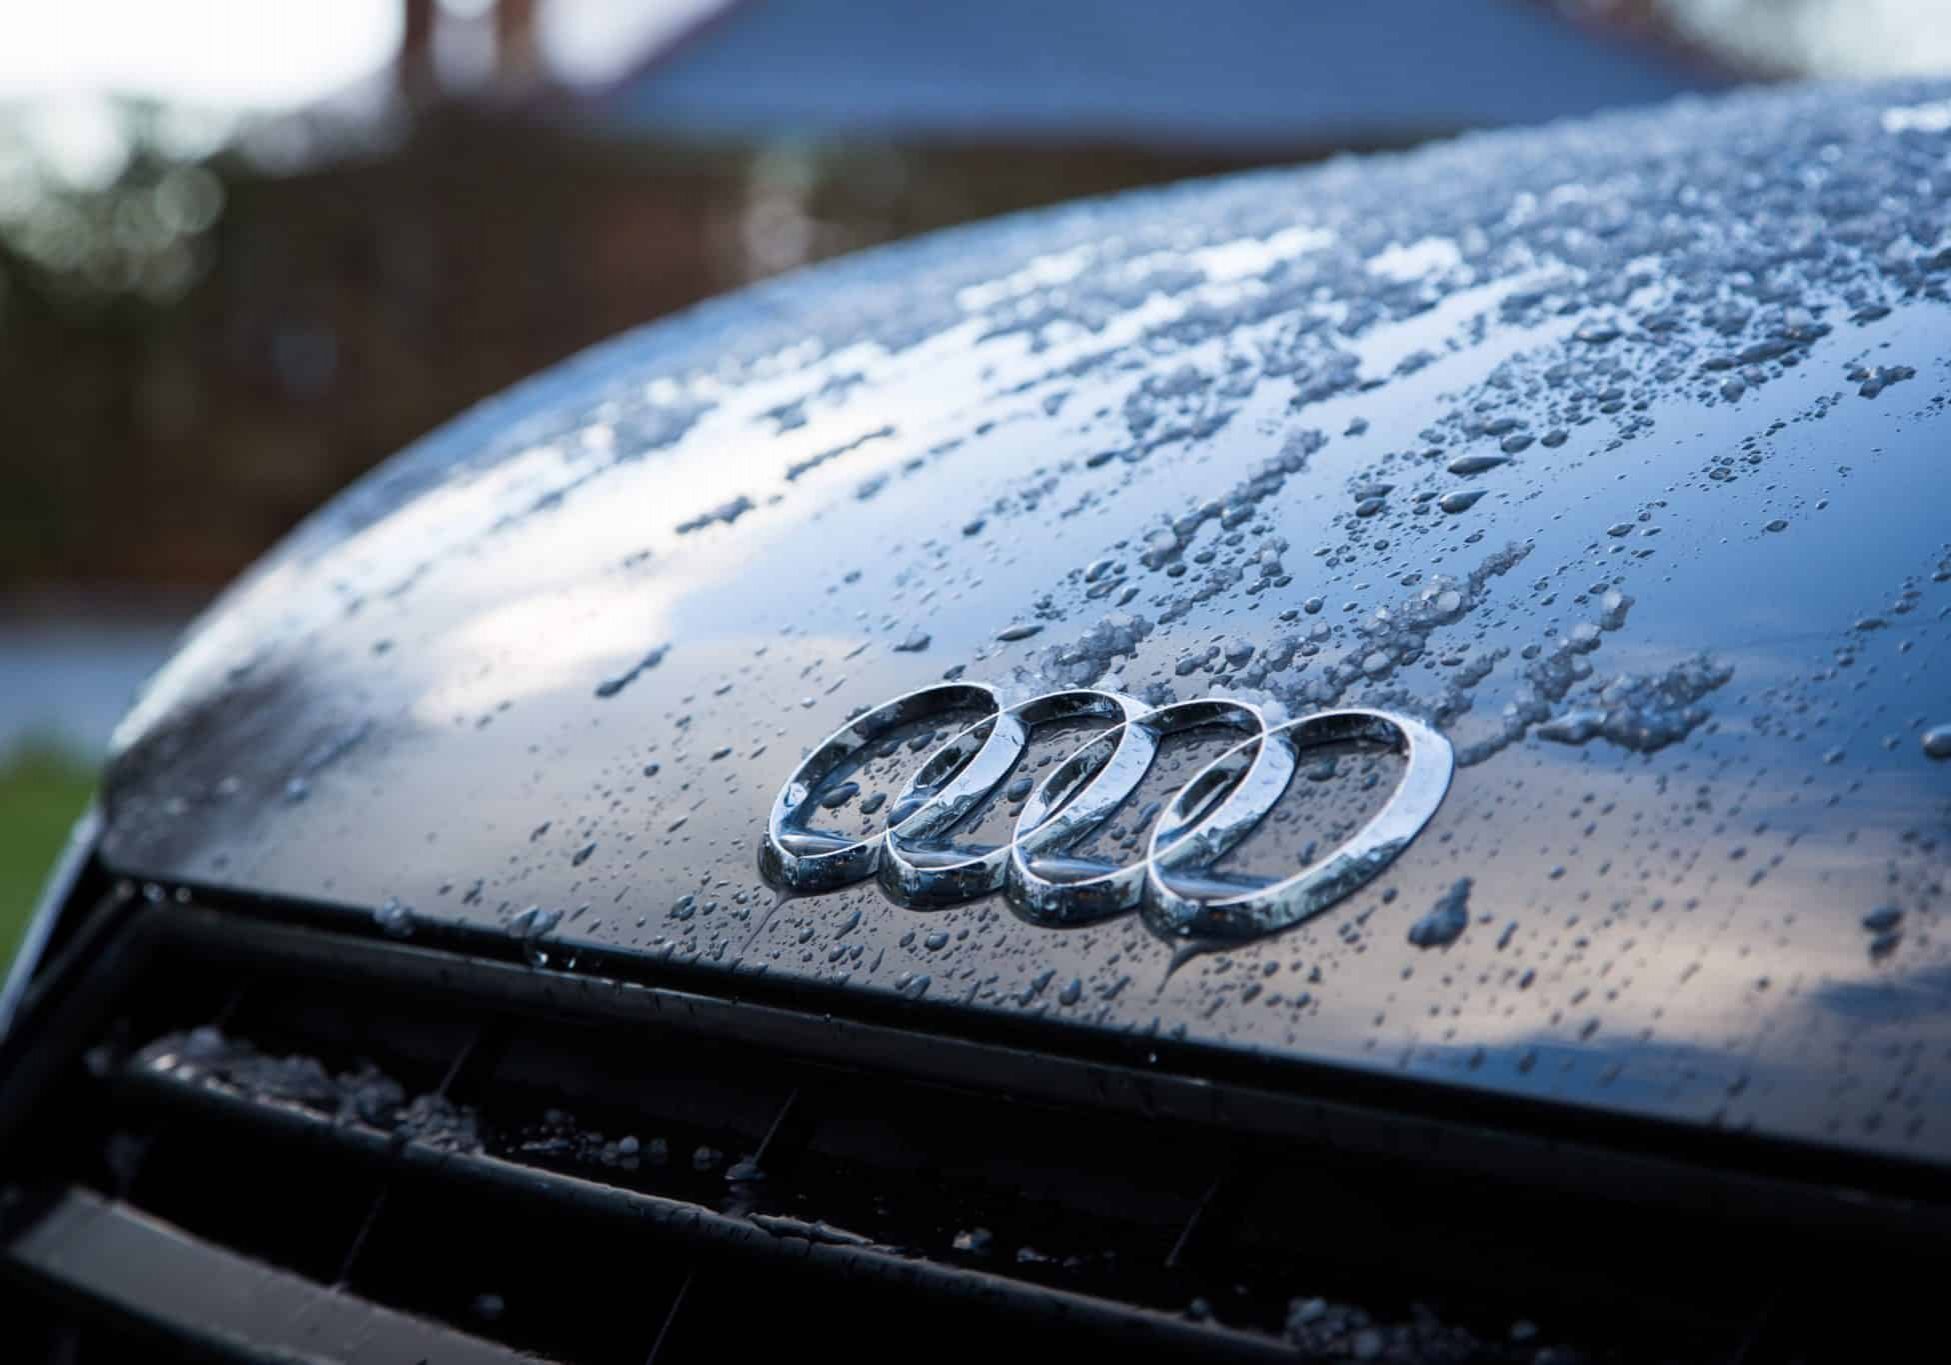 at our Audi Service Centre Near Me in birmingham, we can provide a service that ensures your car runs smoothly